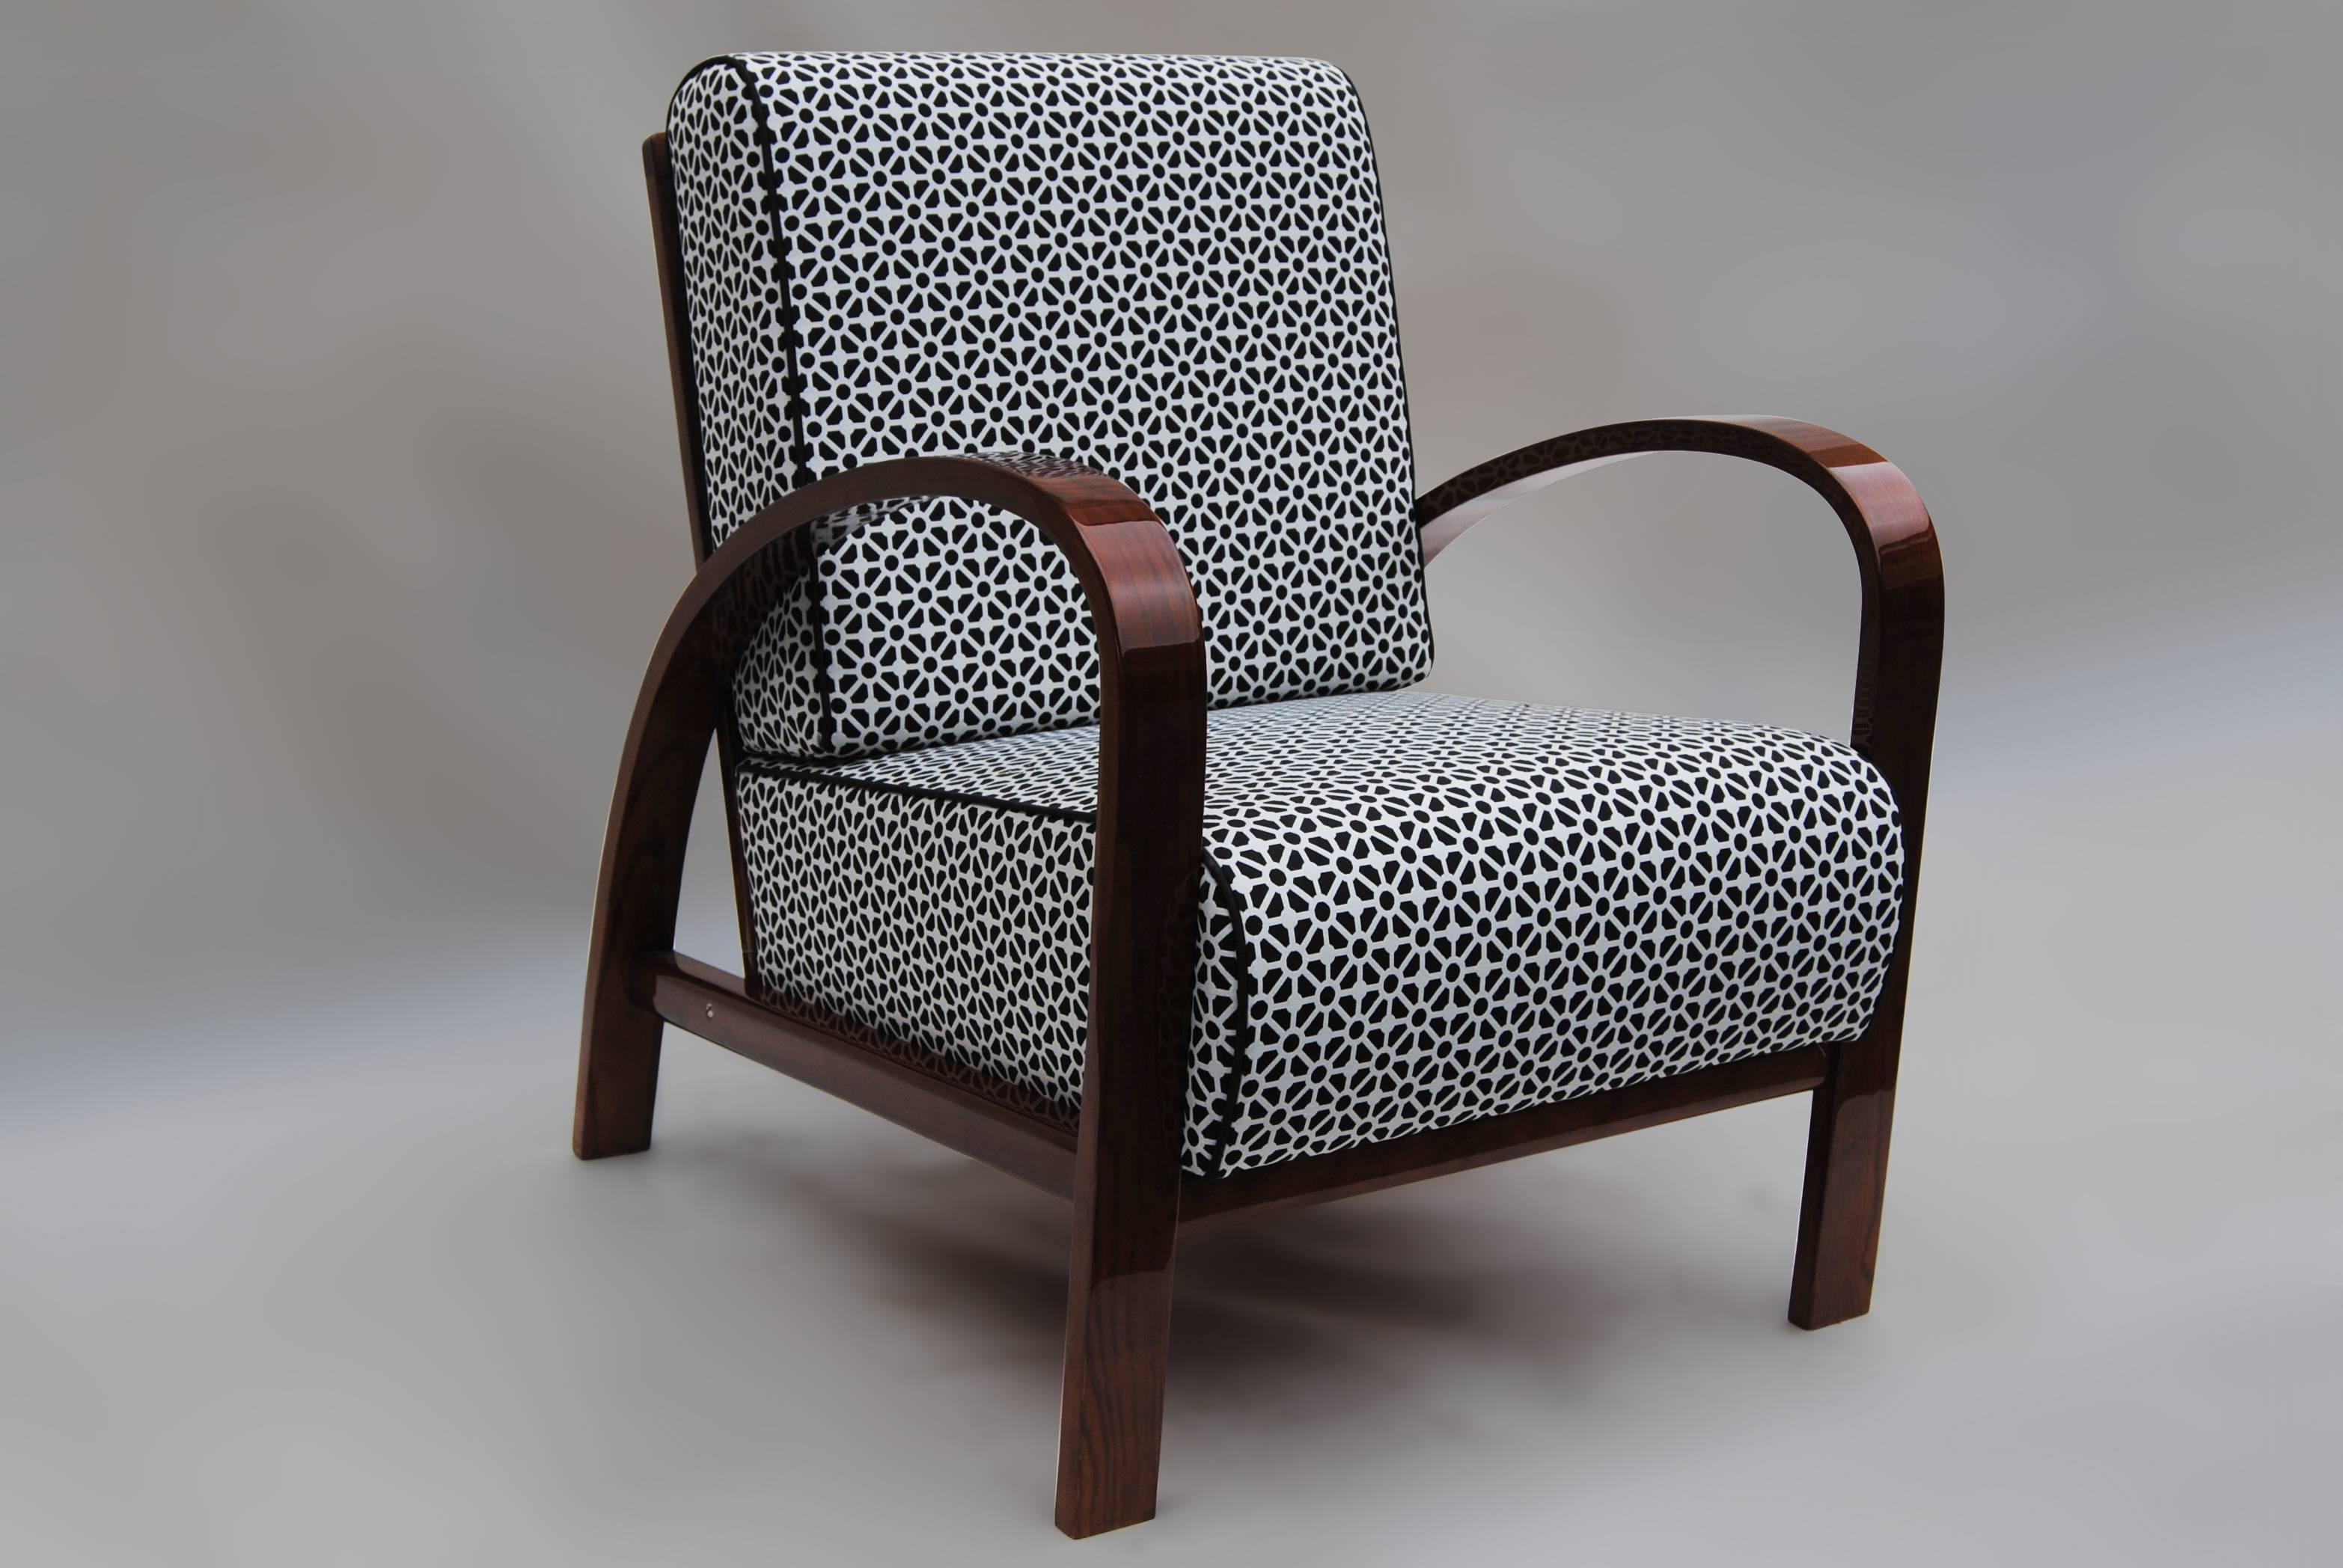 Czech Pair of Adjustable Armchairs Made by United Crafts and Arts Manufacture